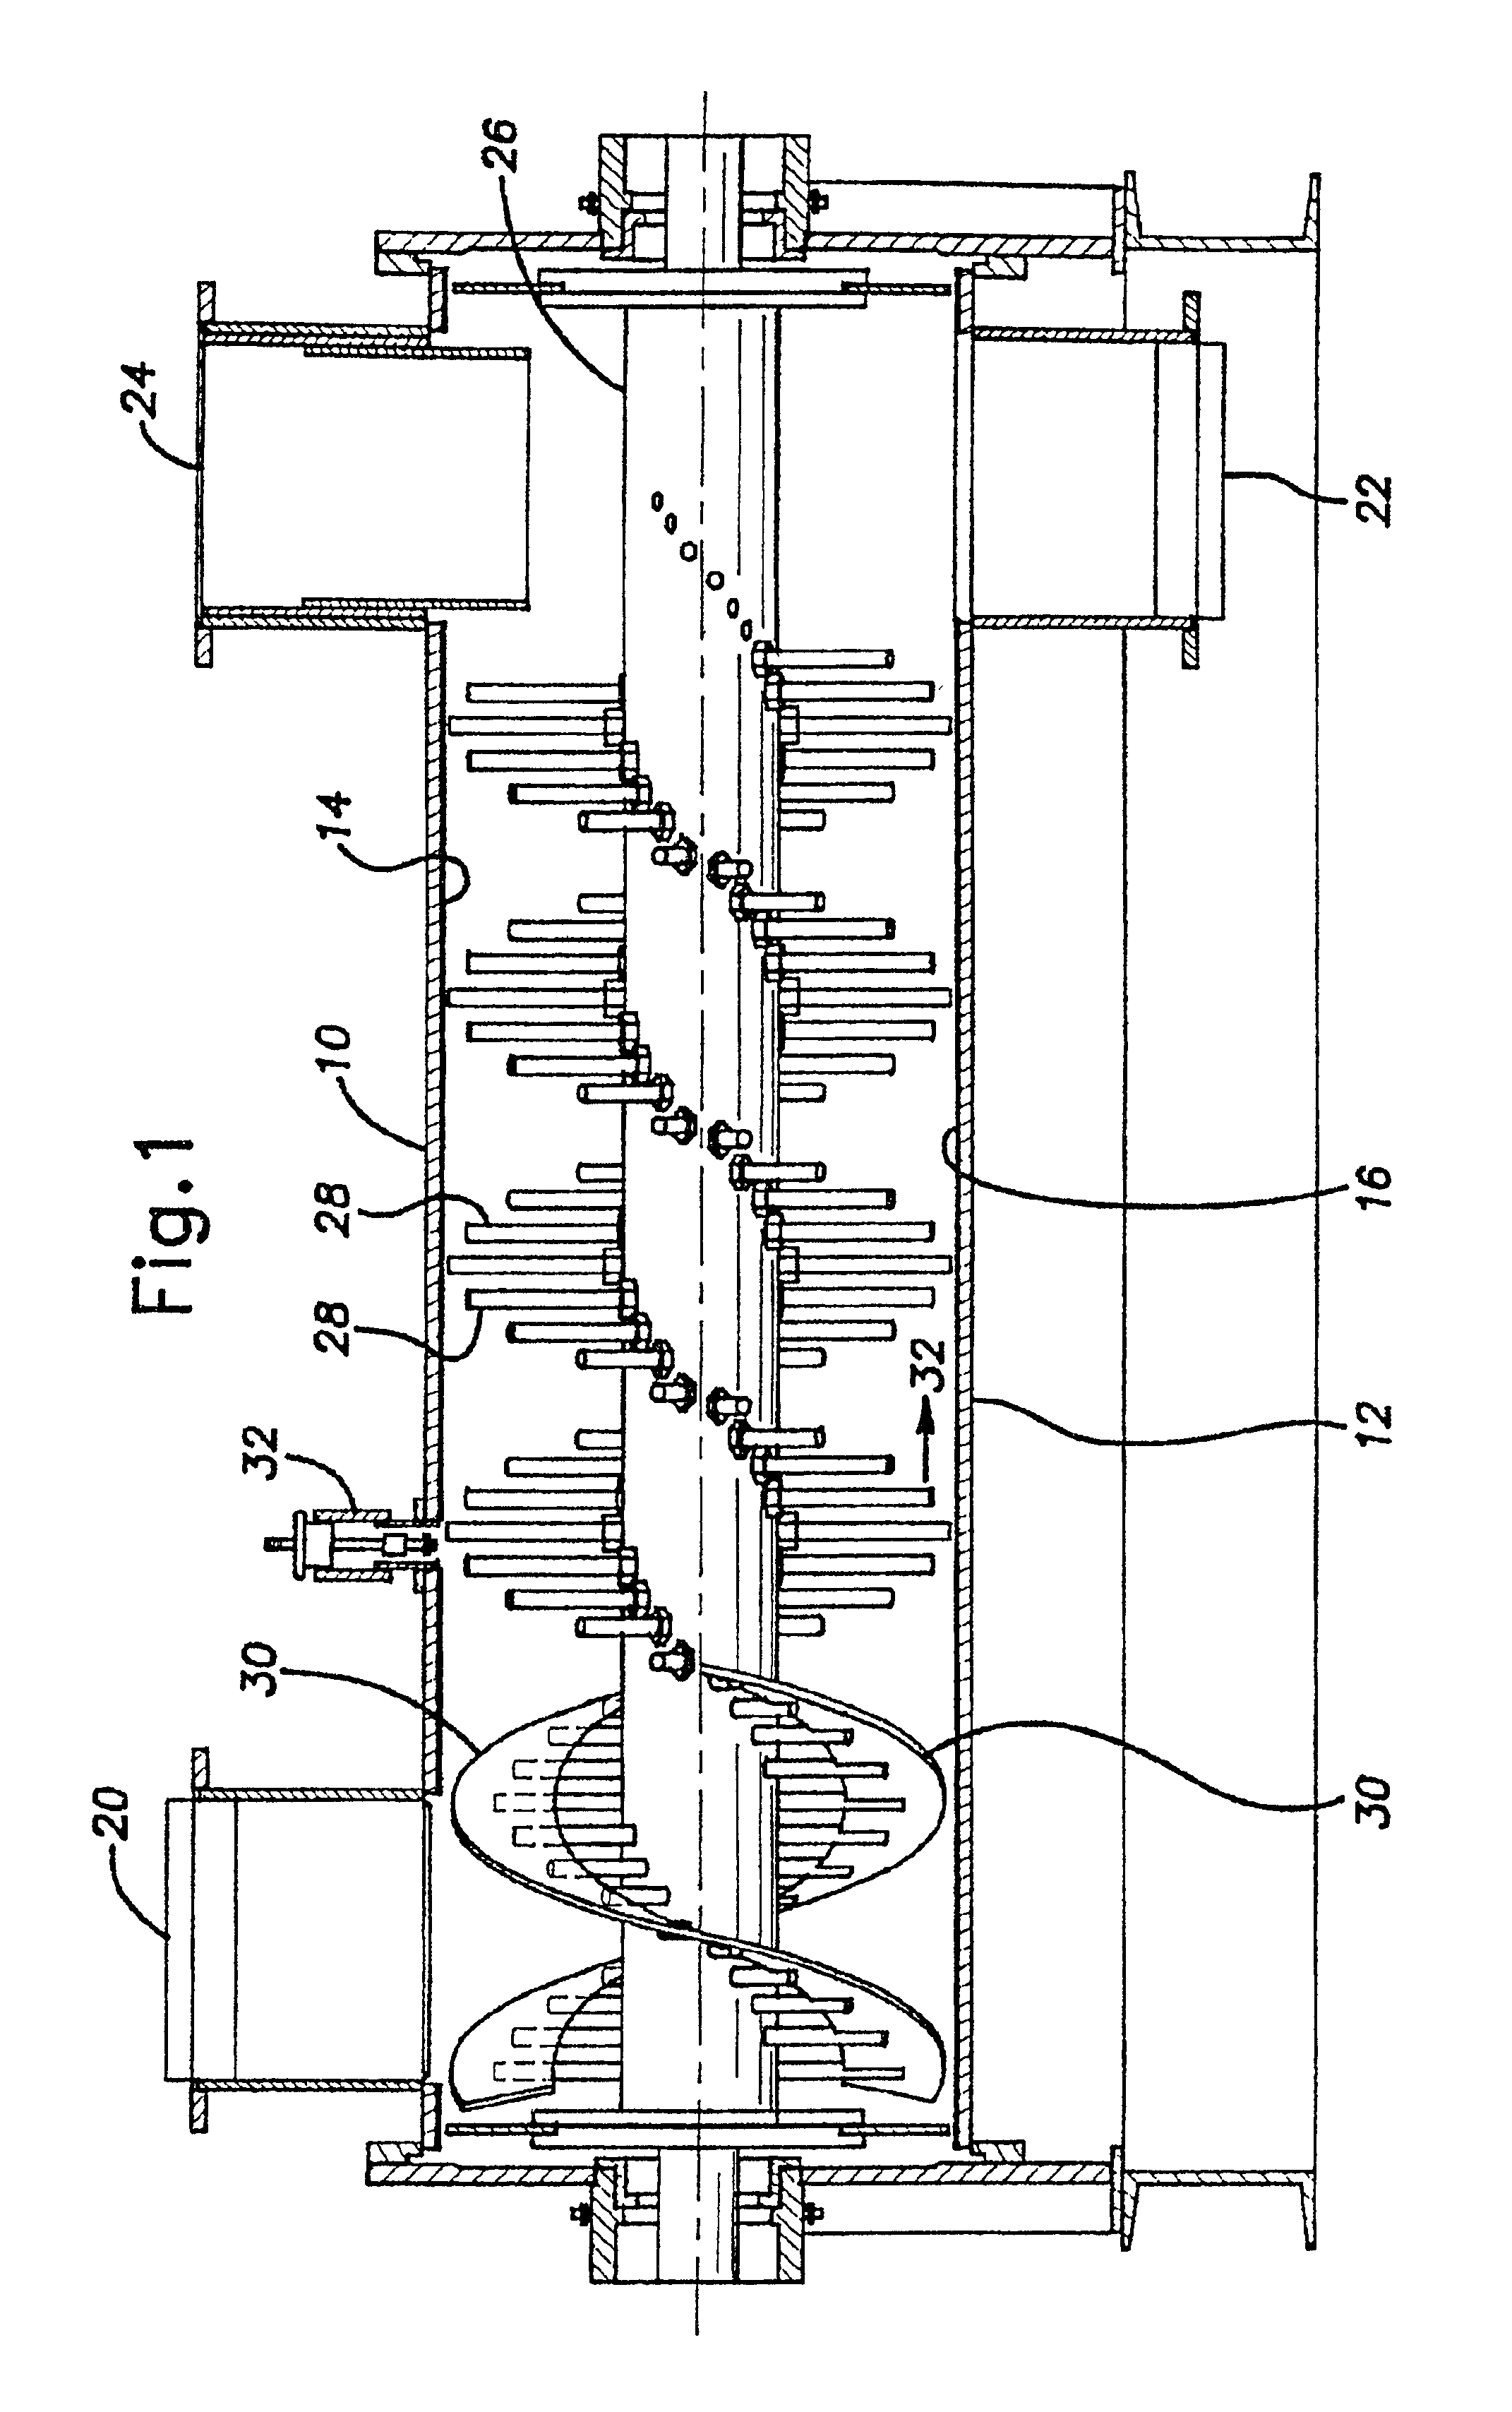 Bead and process for removing dissolved metal contaminants